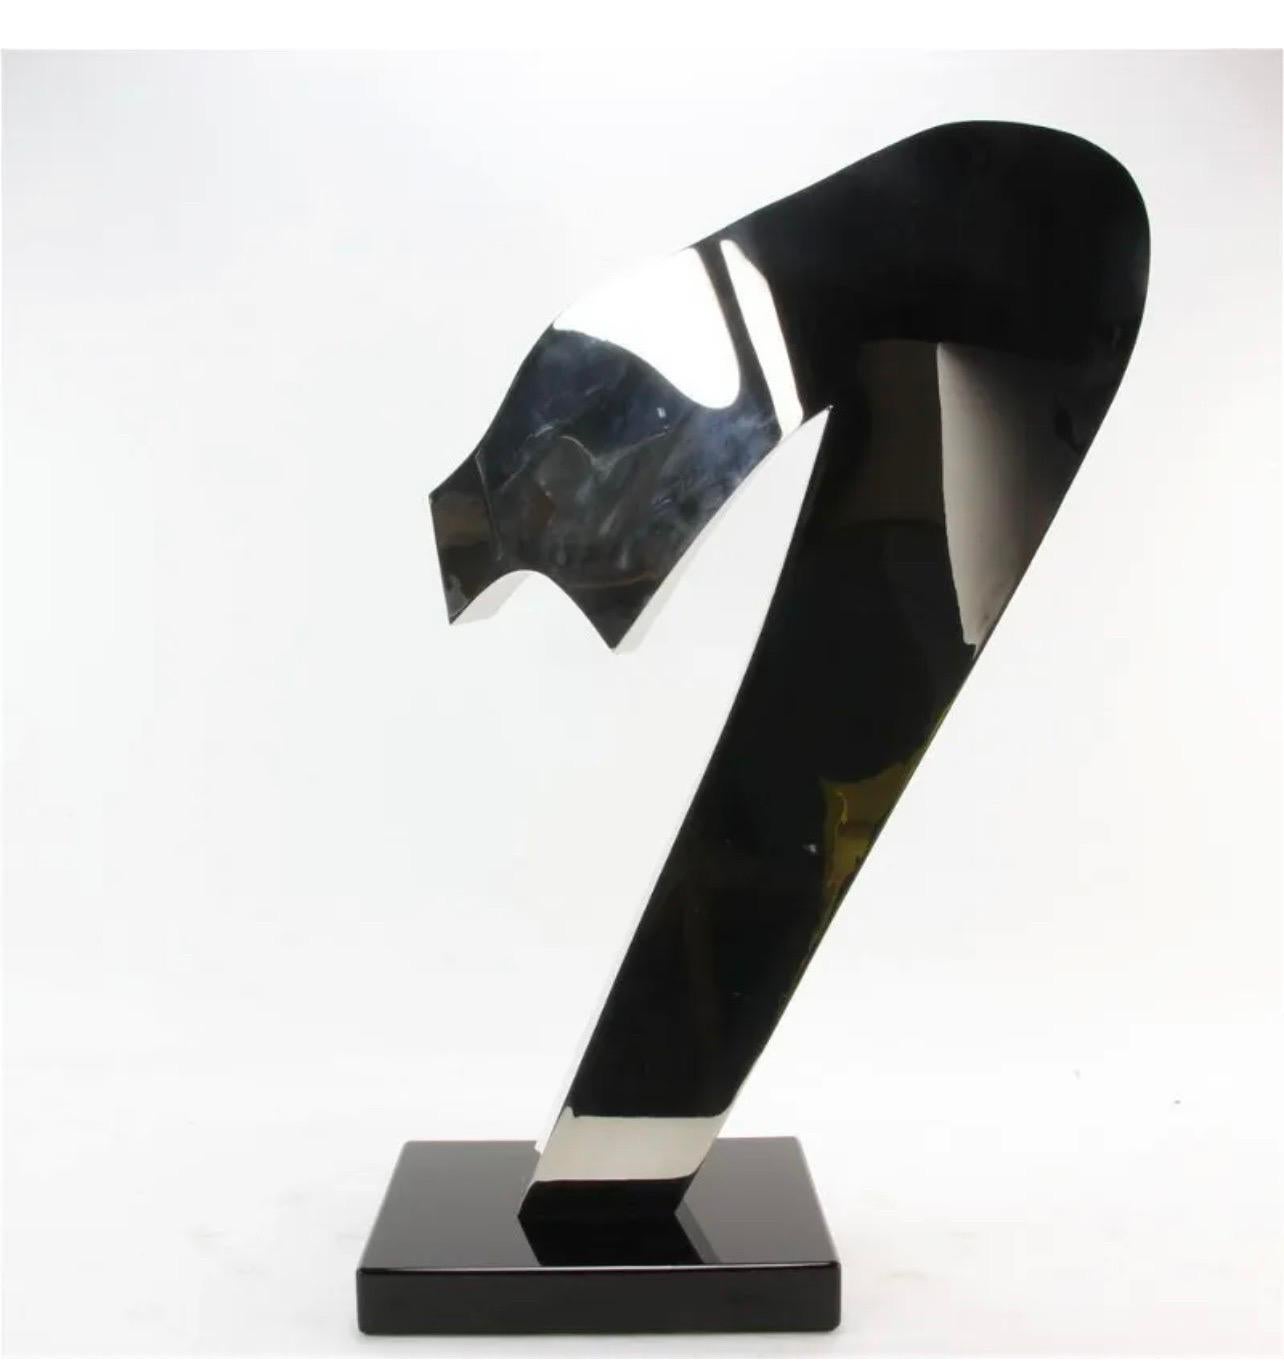 Gary Kahle (American, 1942- ) 
Metal abstract sculpture on black base, 
Hand signed and dated 1984
25 1/2